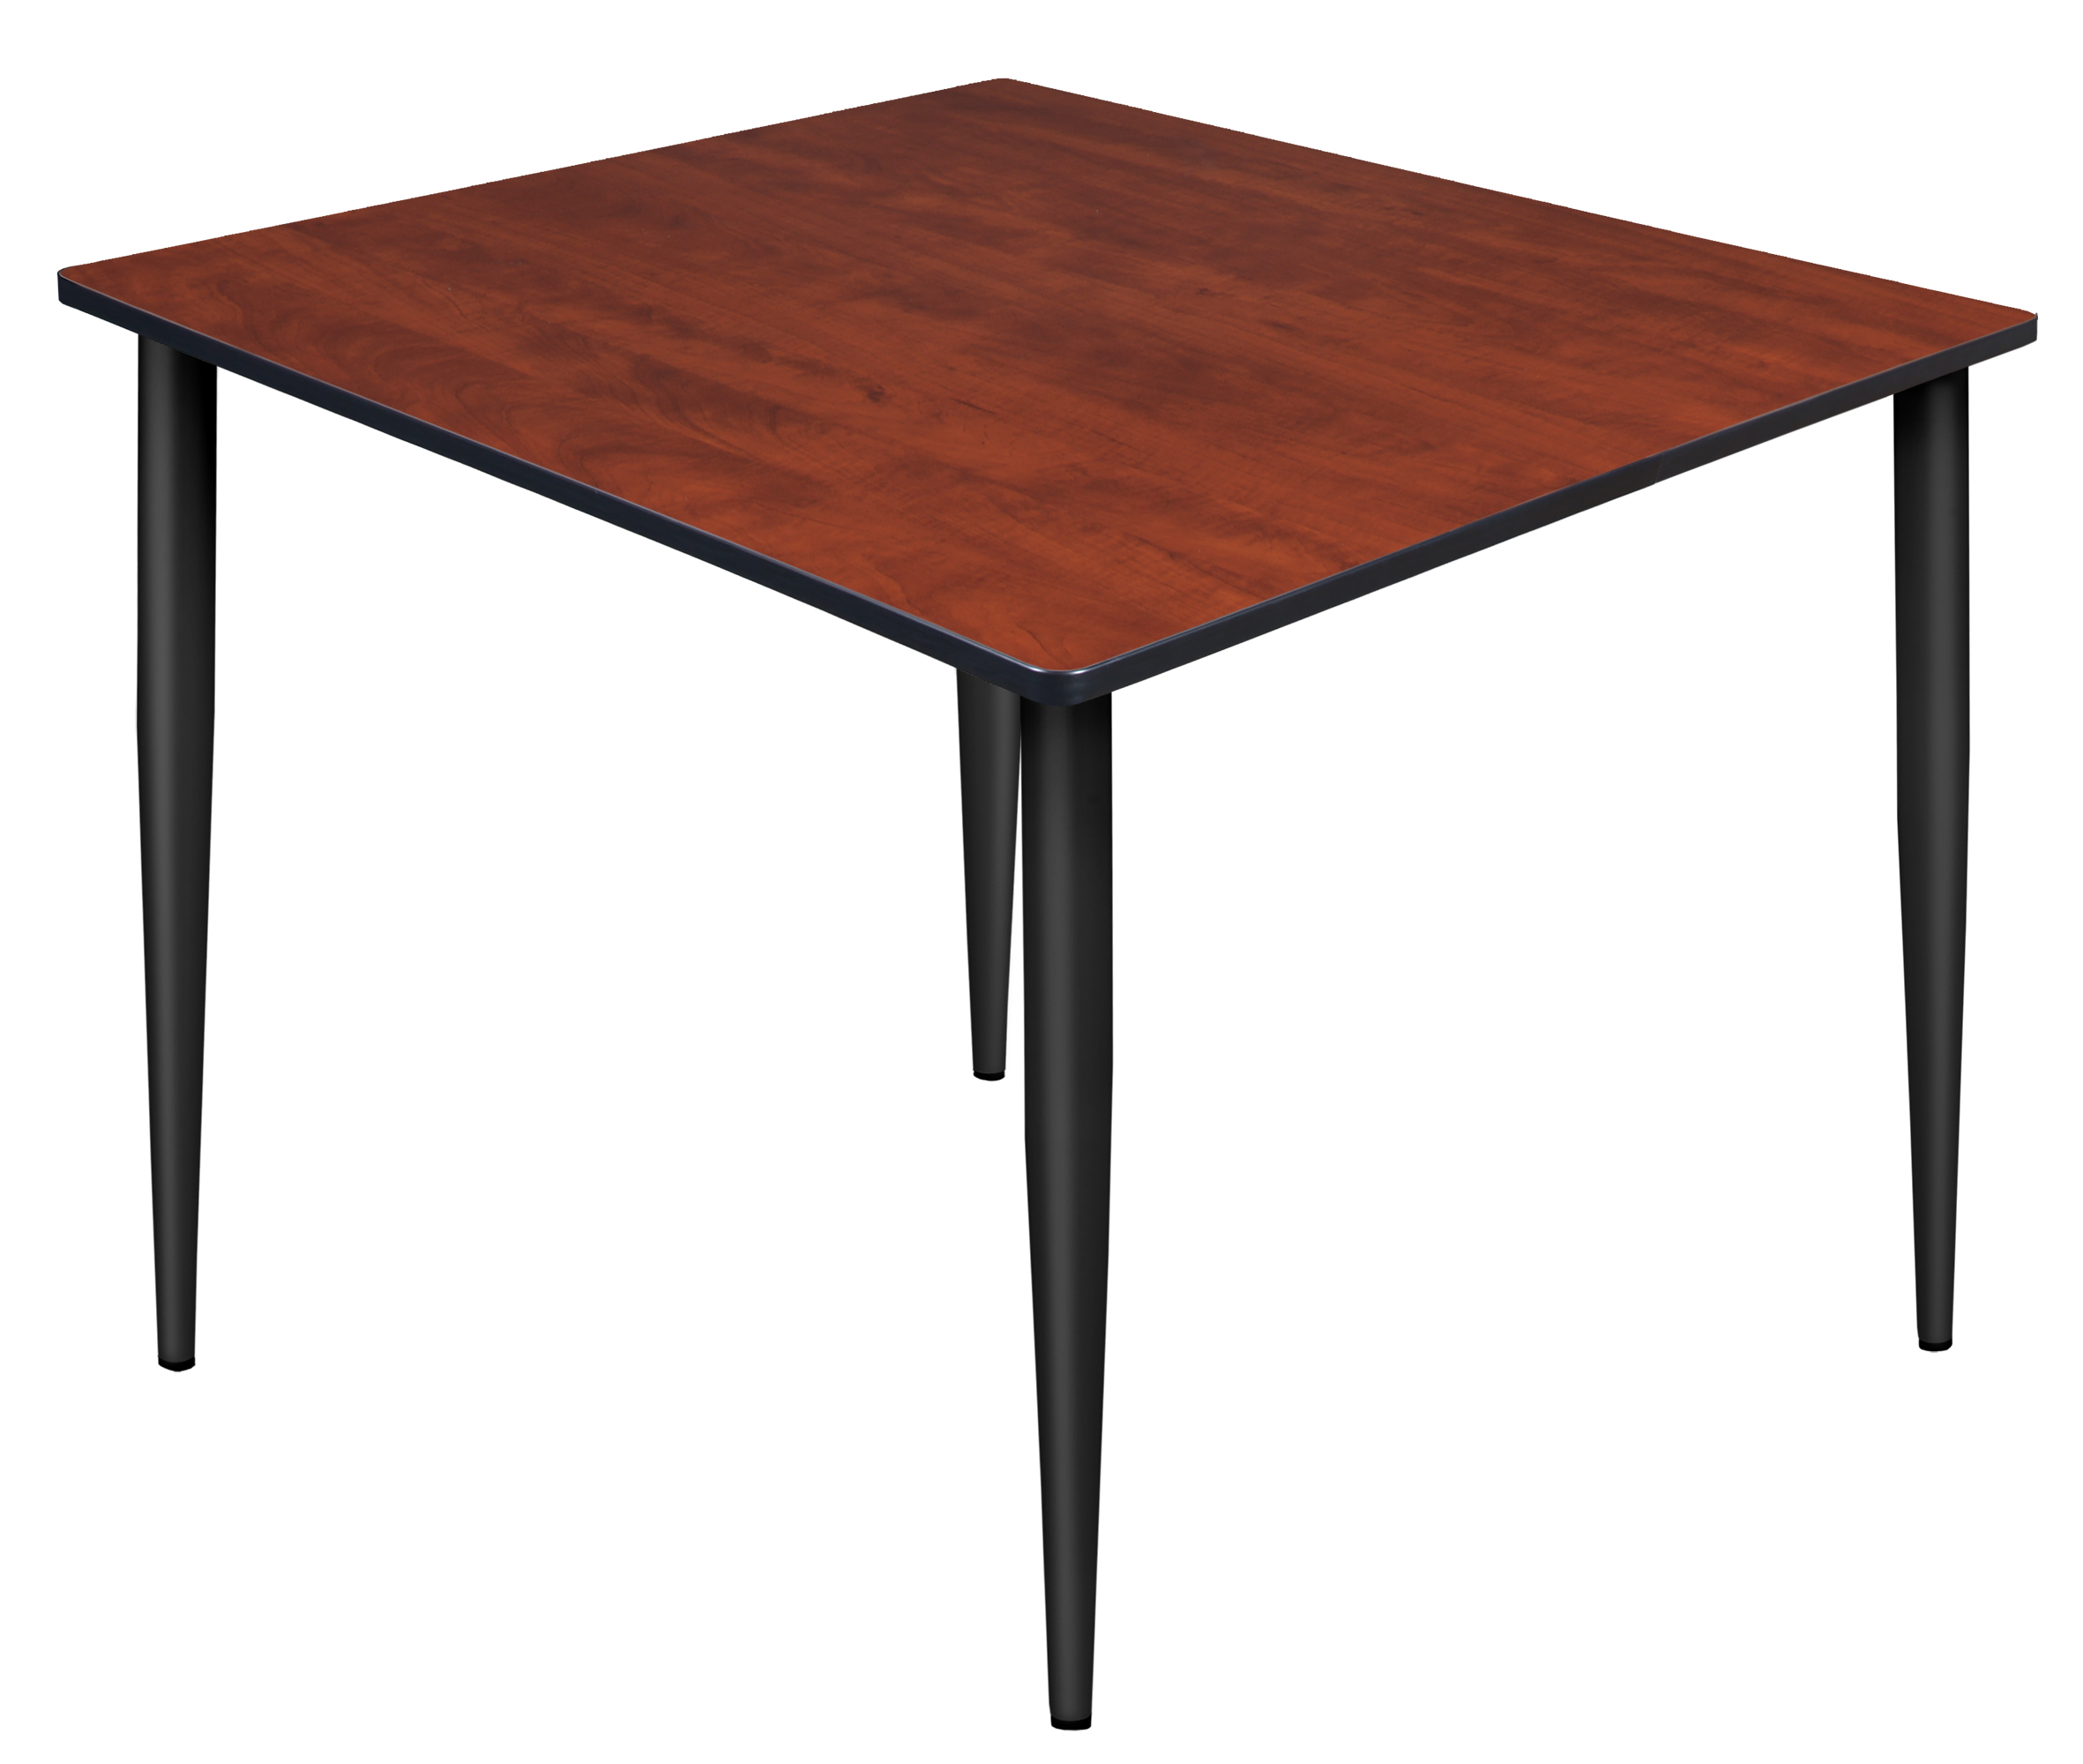 Kahlo 48" Square Tapered Leg Table - Cherry/Black - image 1 of 4